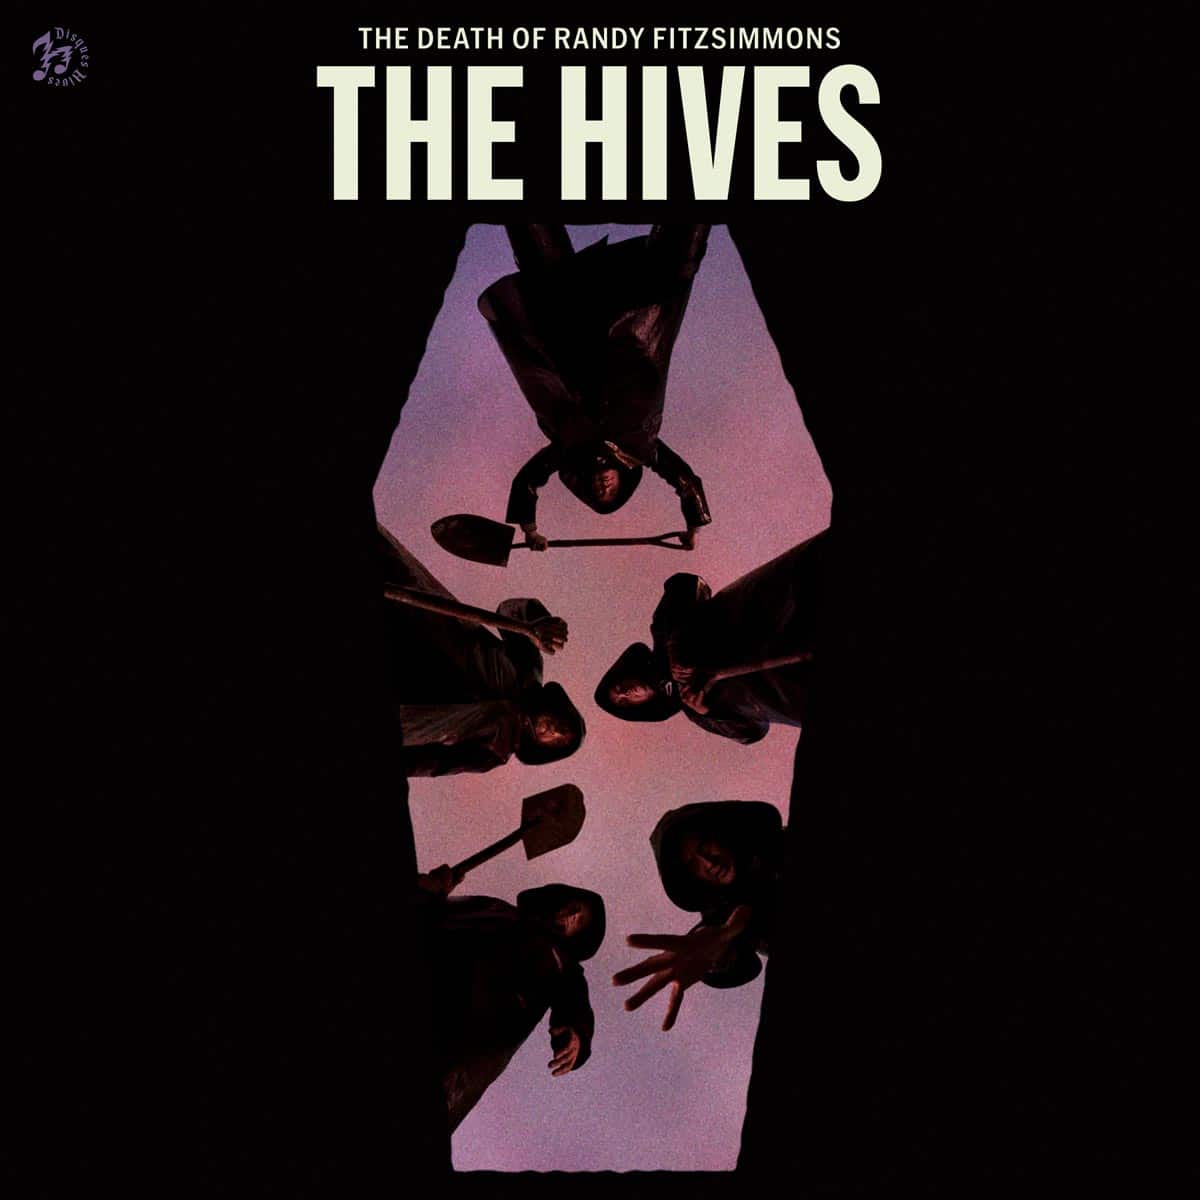 the hives the death of randy fitzsimmons